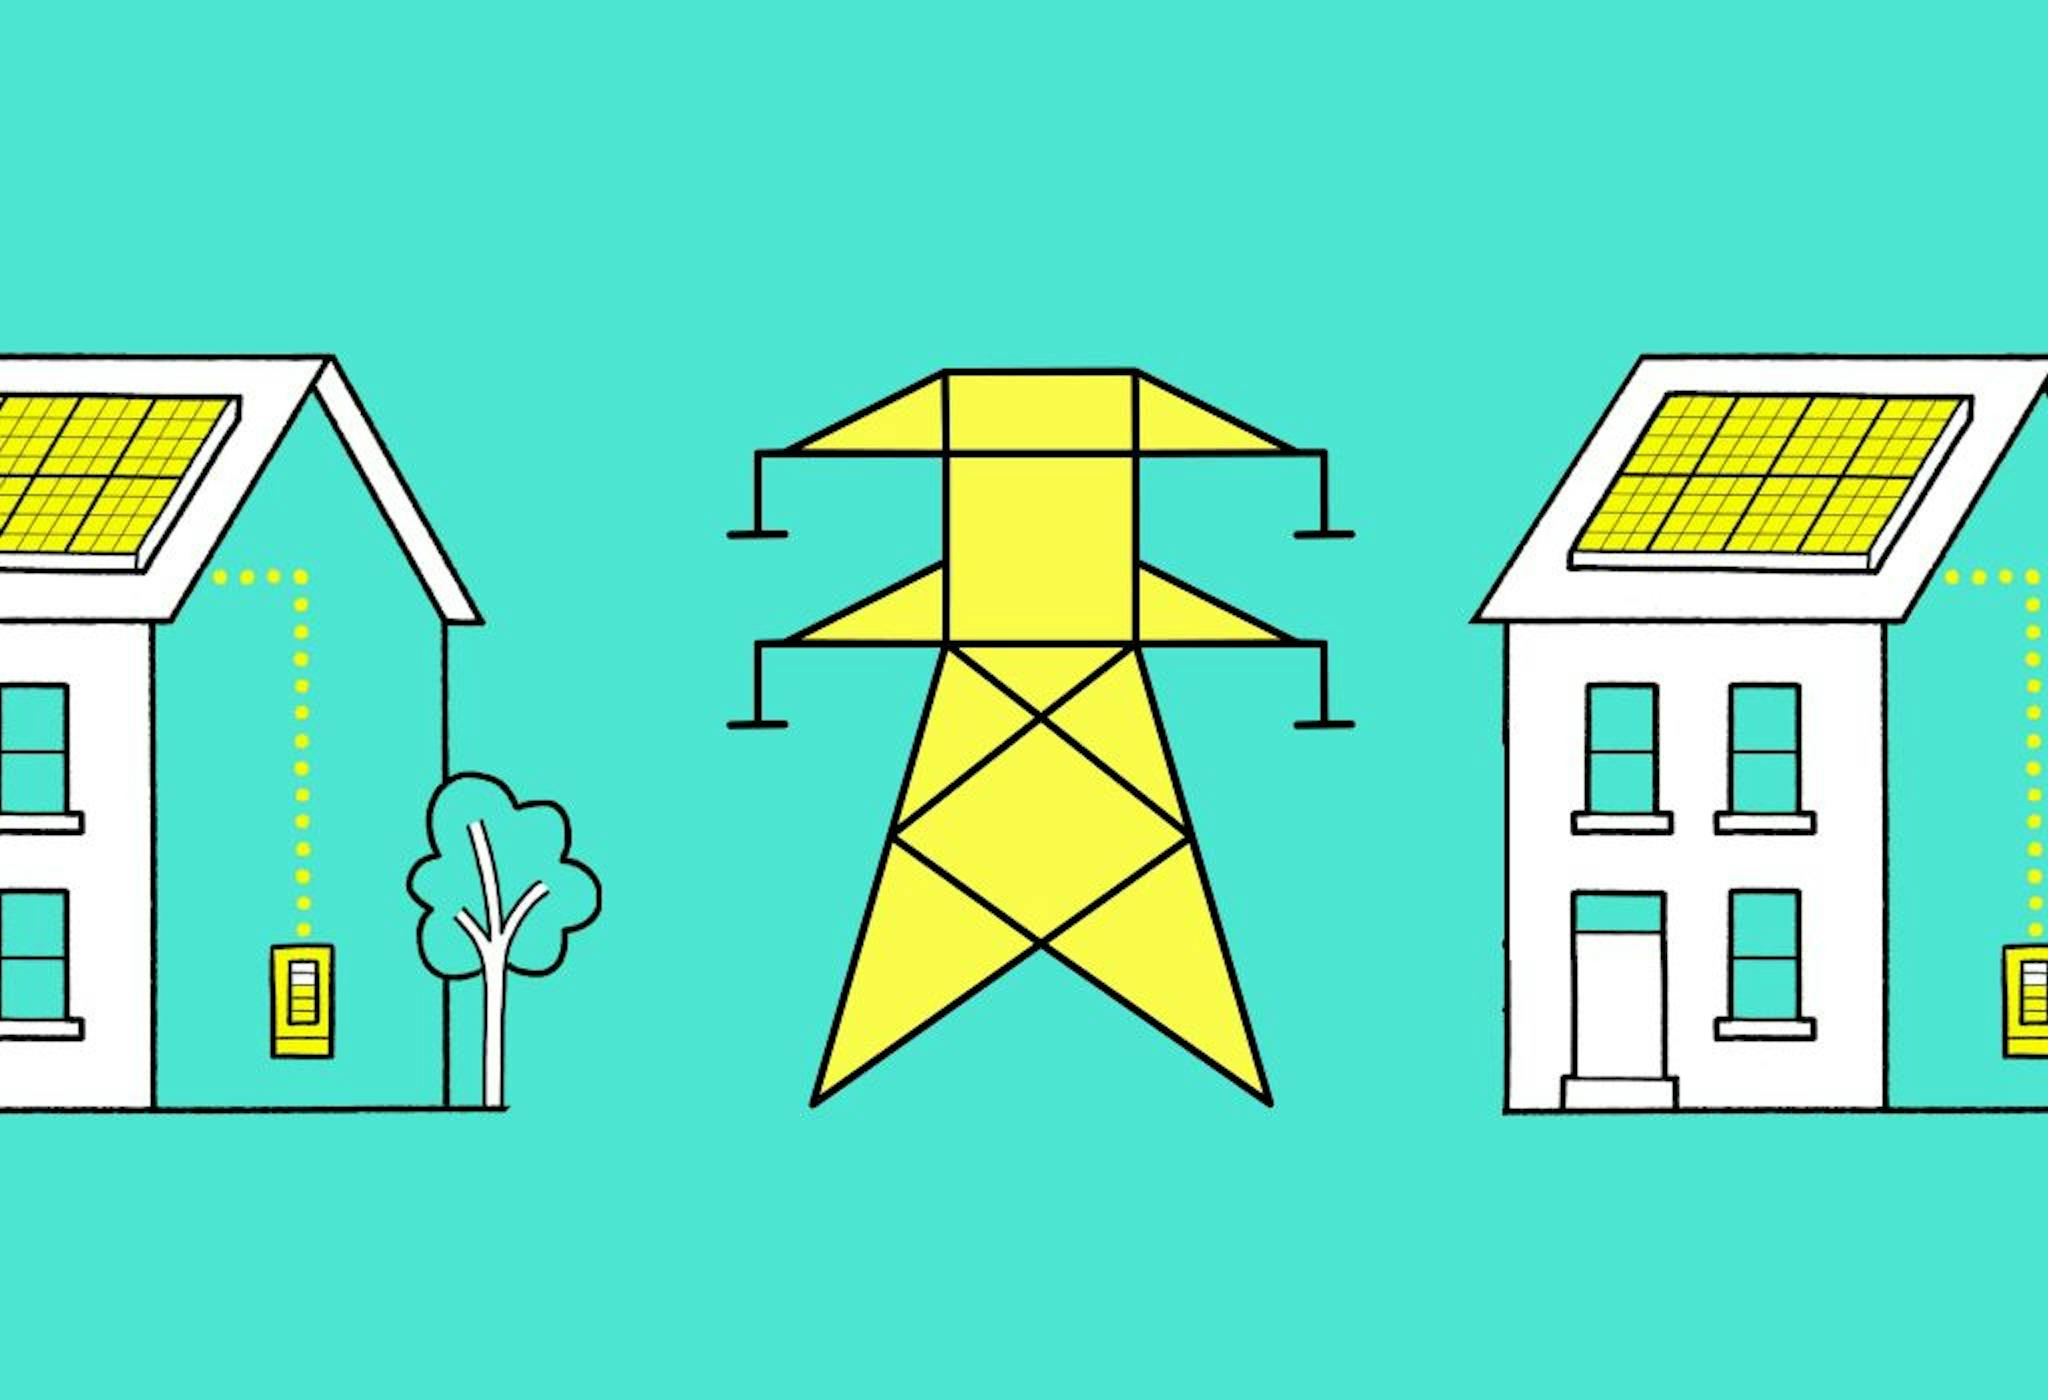 Two cartoon houses with solar panels on their roofs, with a yellow electricity pylon in between them. Turquoise background